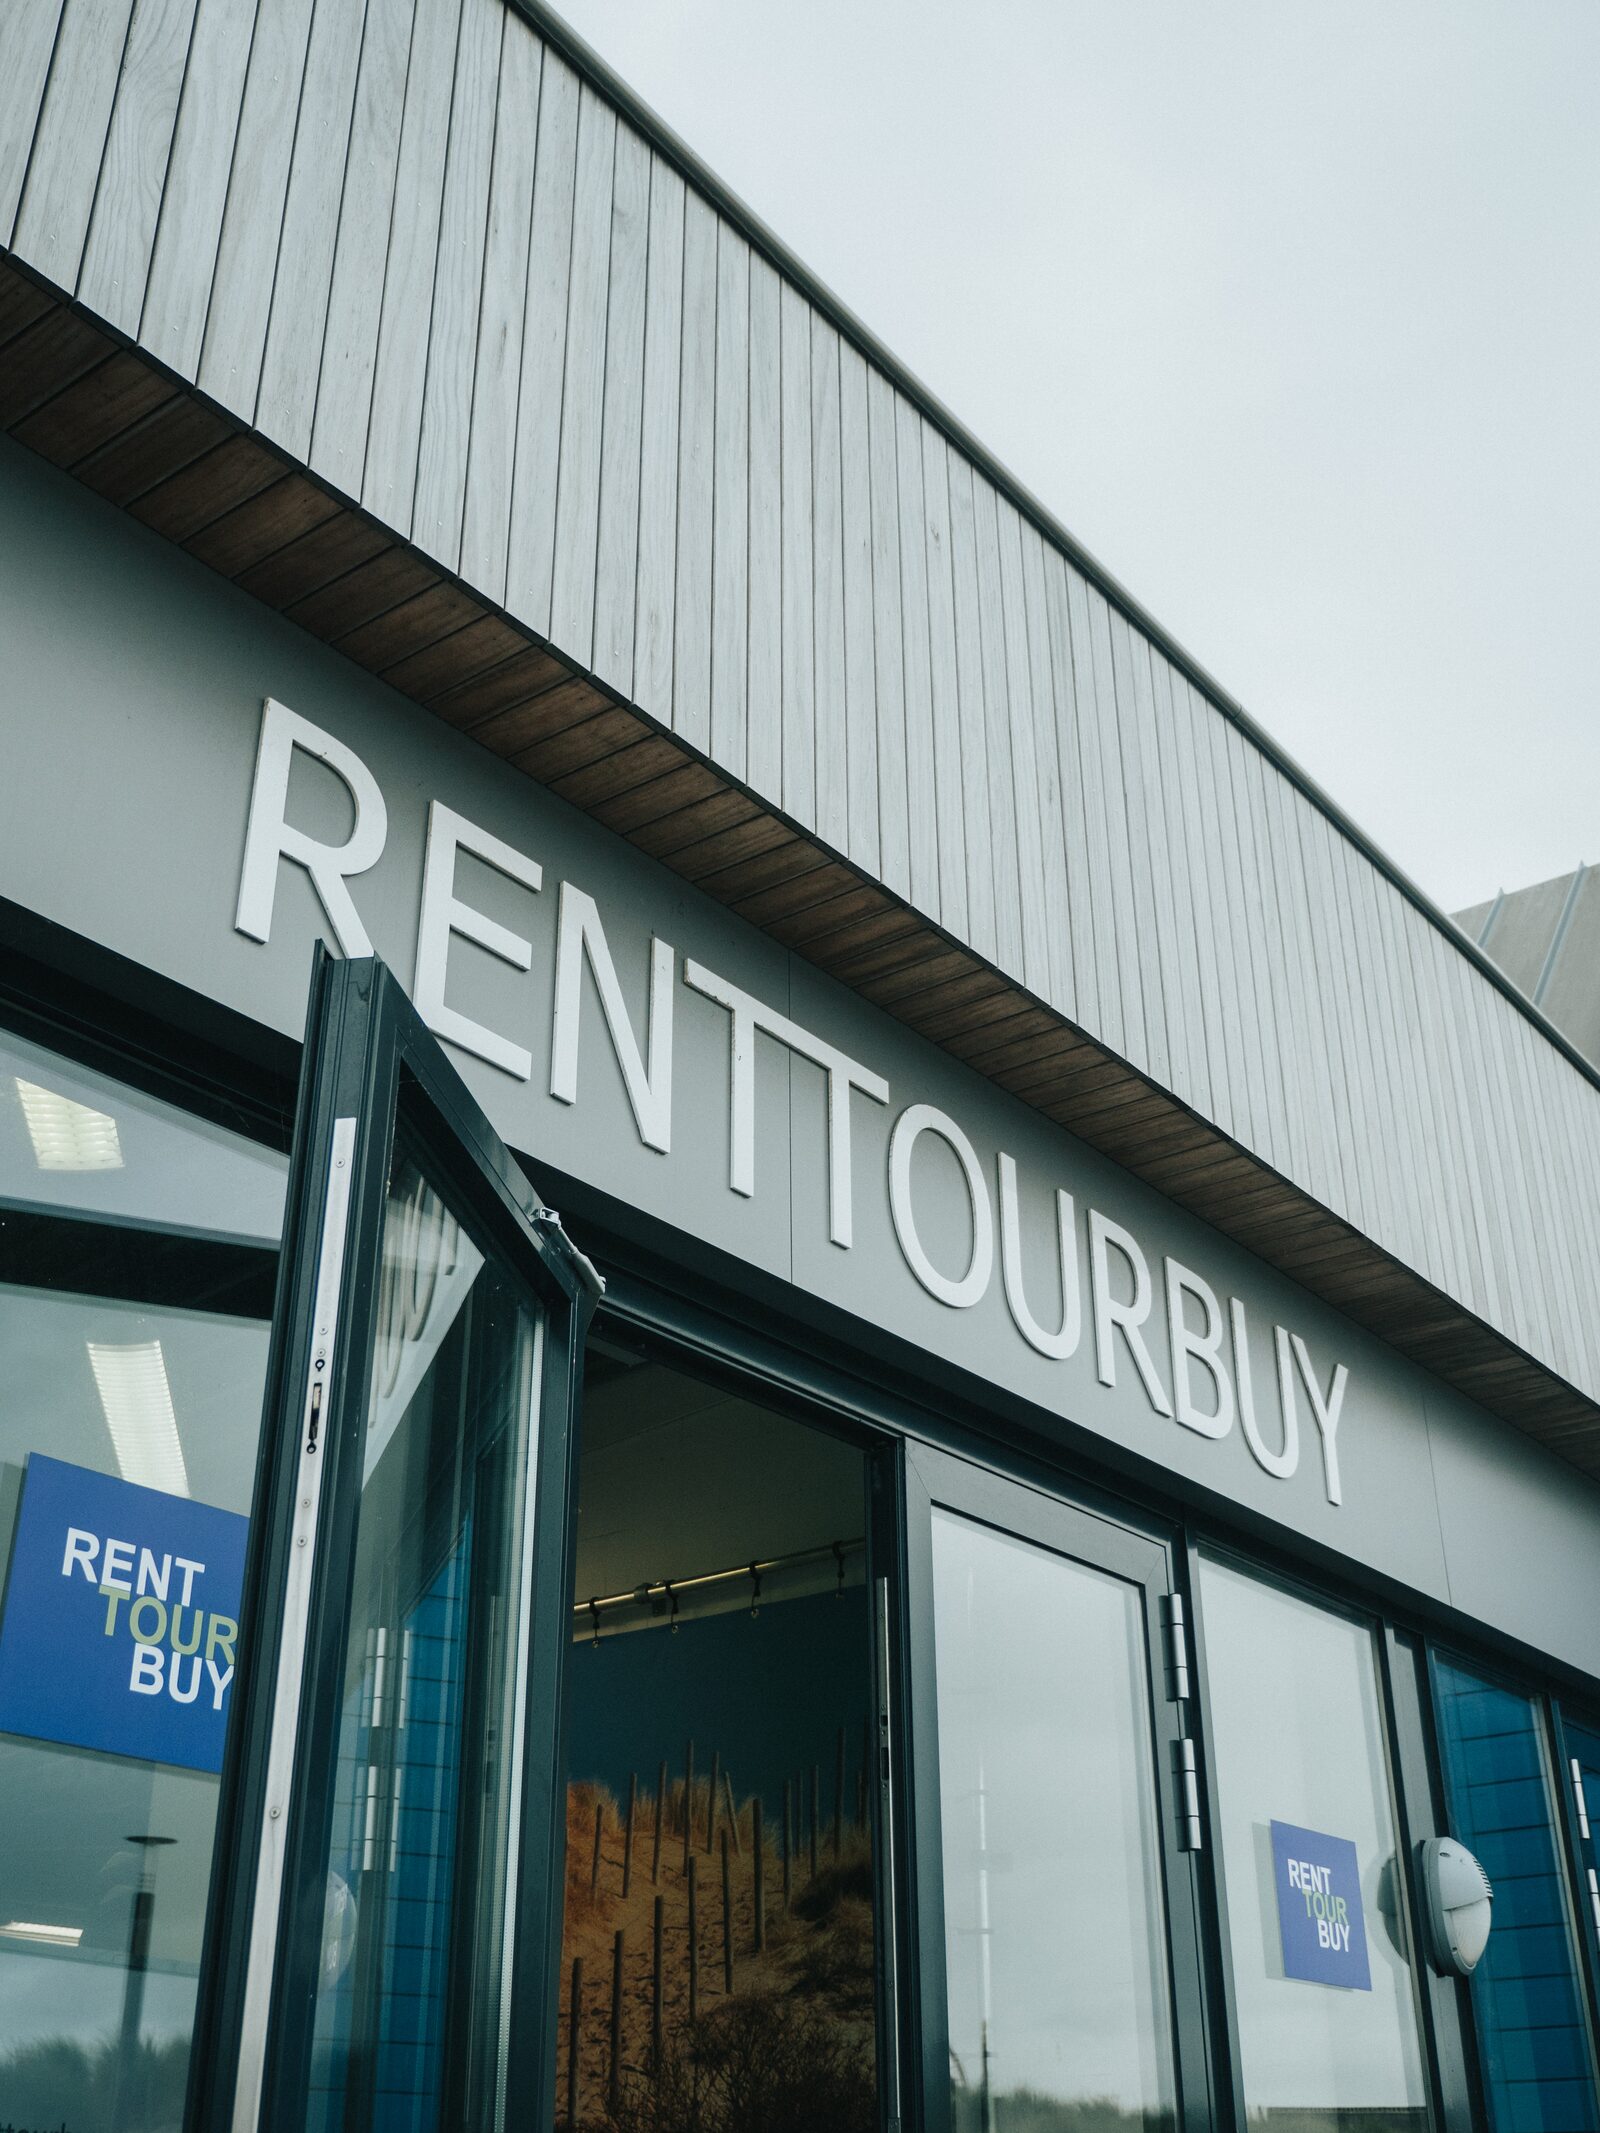 RentTourBuy in Ouddorp